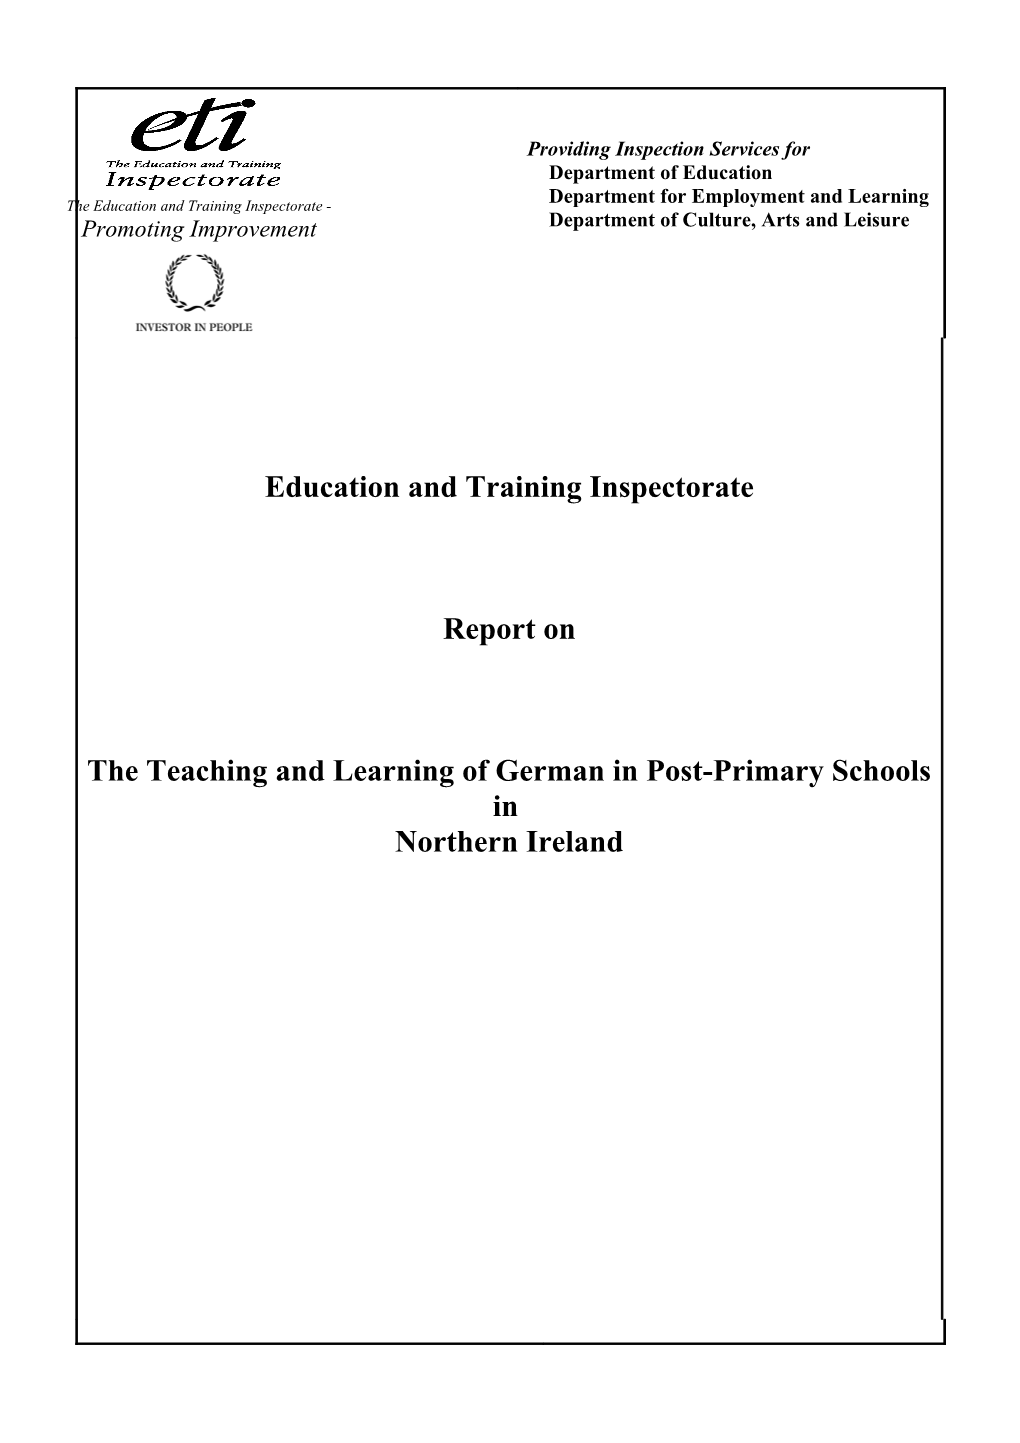 The Teaching and Learning of German in Schools in Northern Ireland